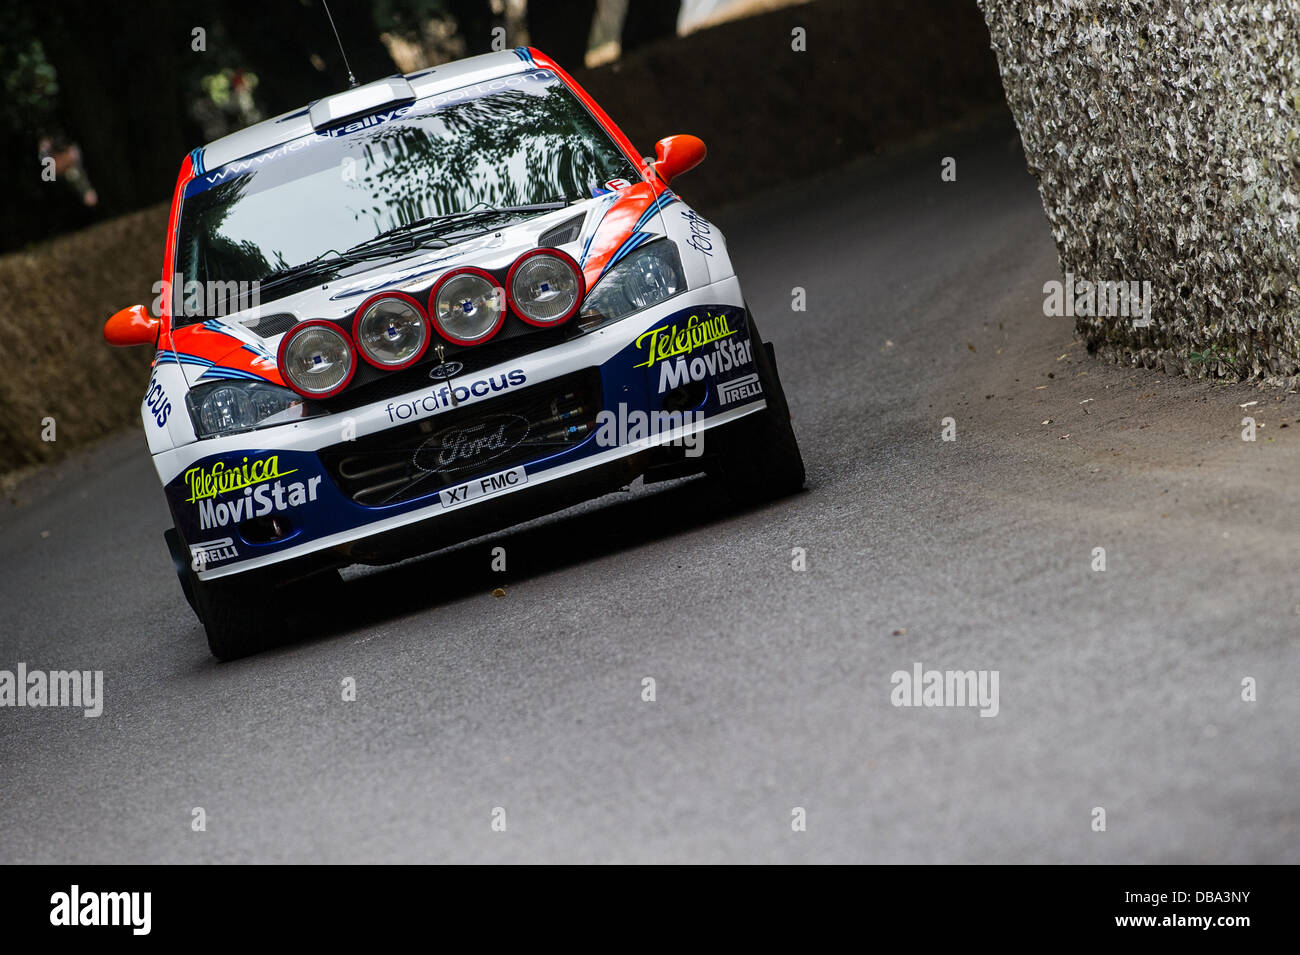 Chichester, UK - July 2013: Ford Focus WRC passes the flint wall in action at the Goodwood Festival of Speed on July 12, 2013. Stock Photo